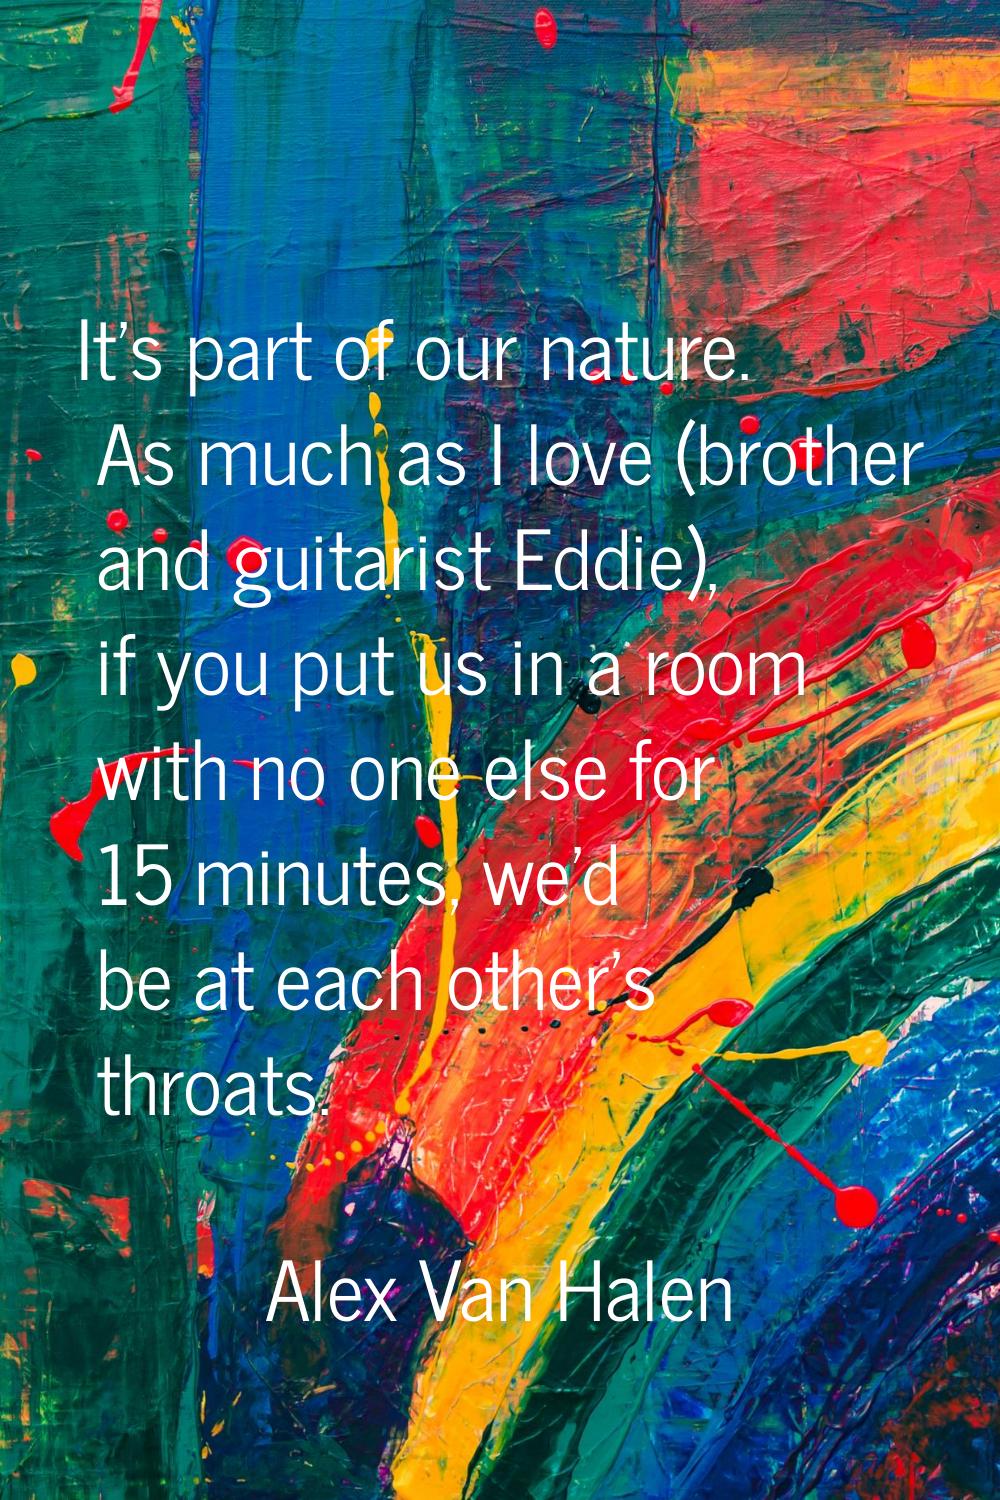 It's part of our nature. As much as I love (brother and guitarist Eddie), if you put us in a room w